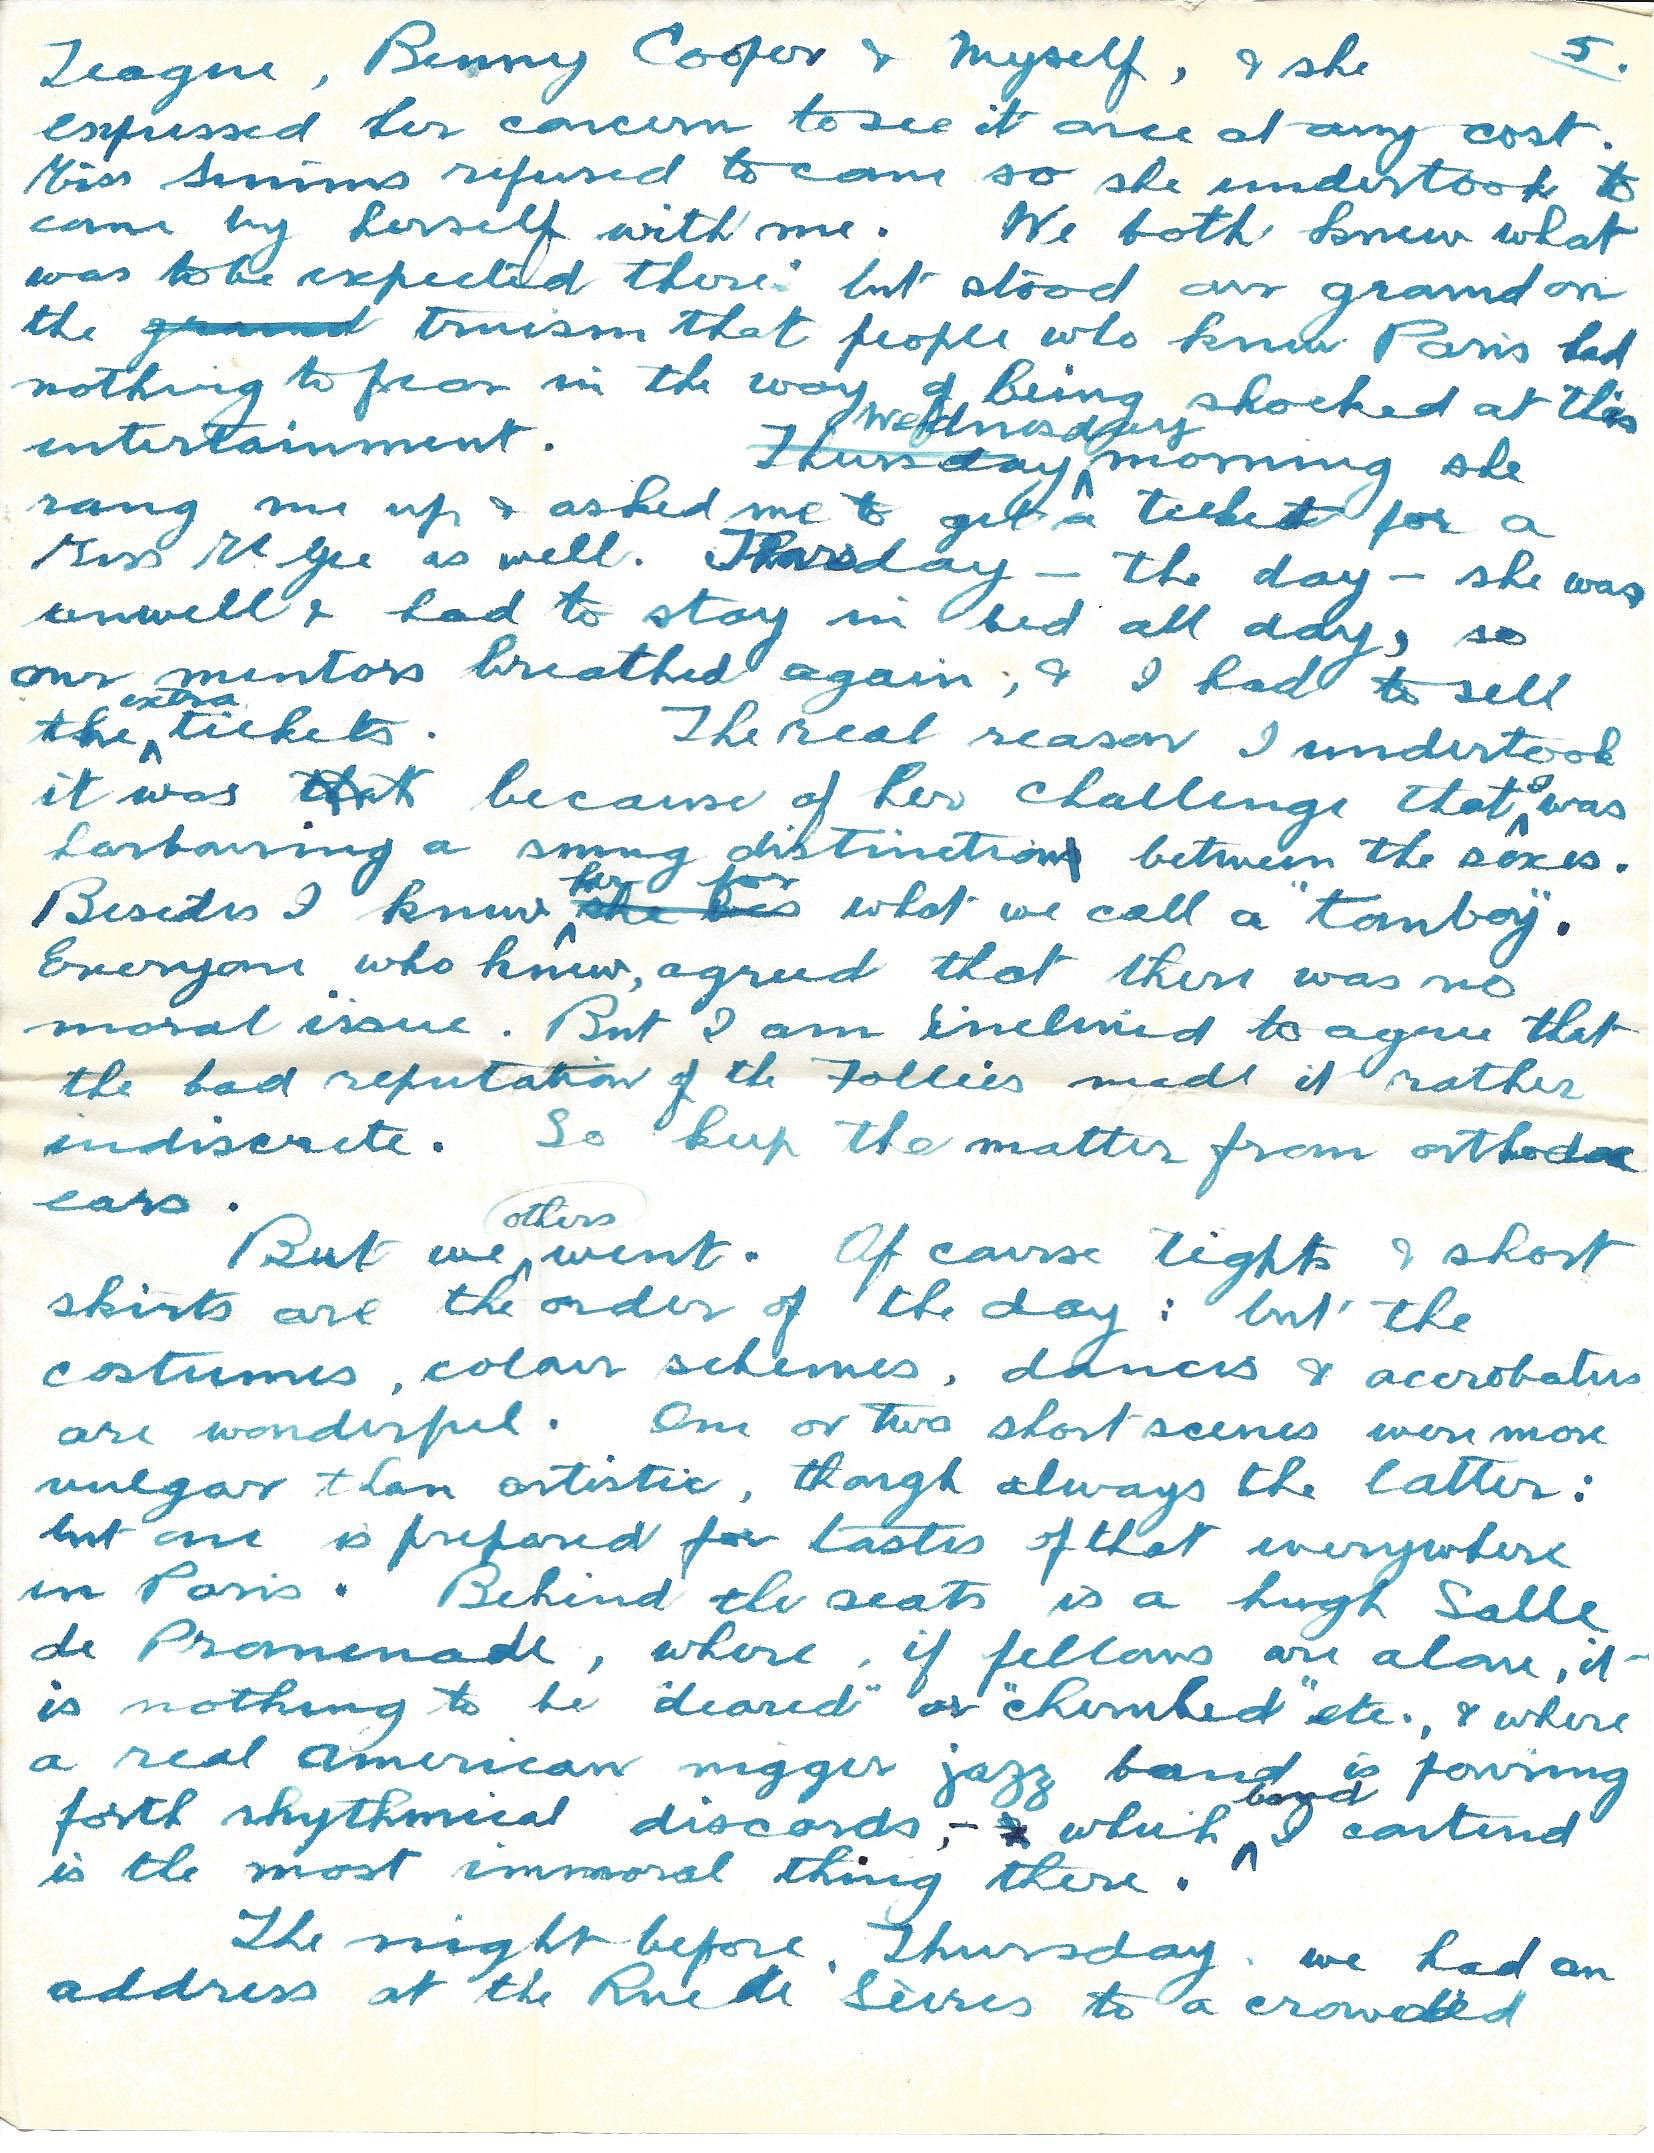 1919-12-13 Page 5 letter by Donald Bearman